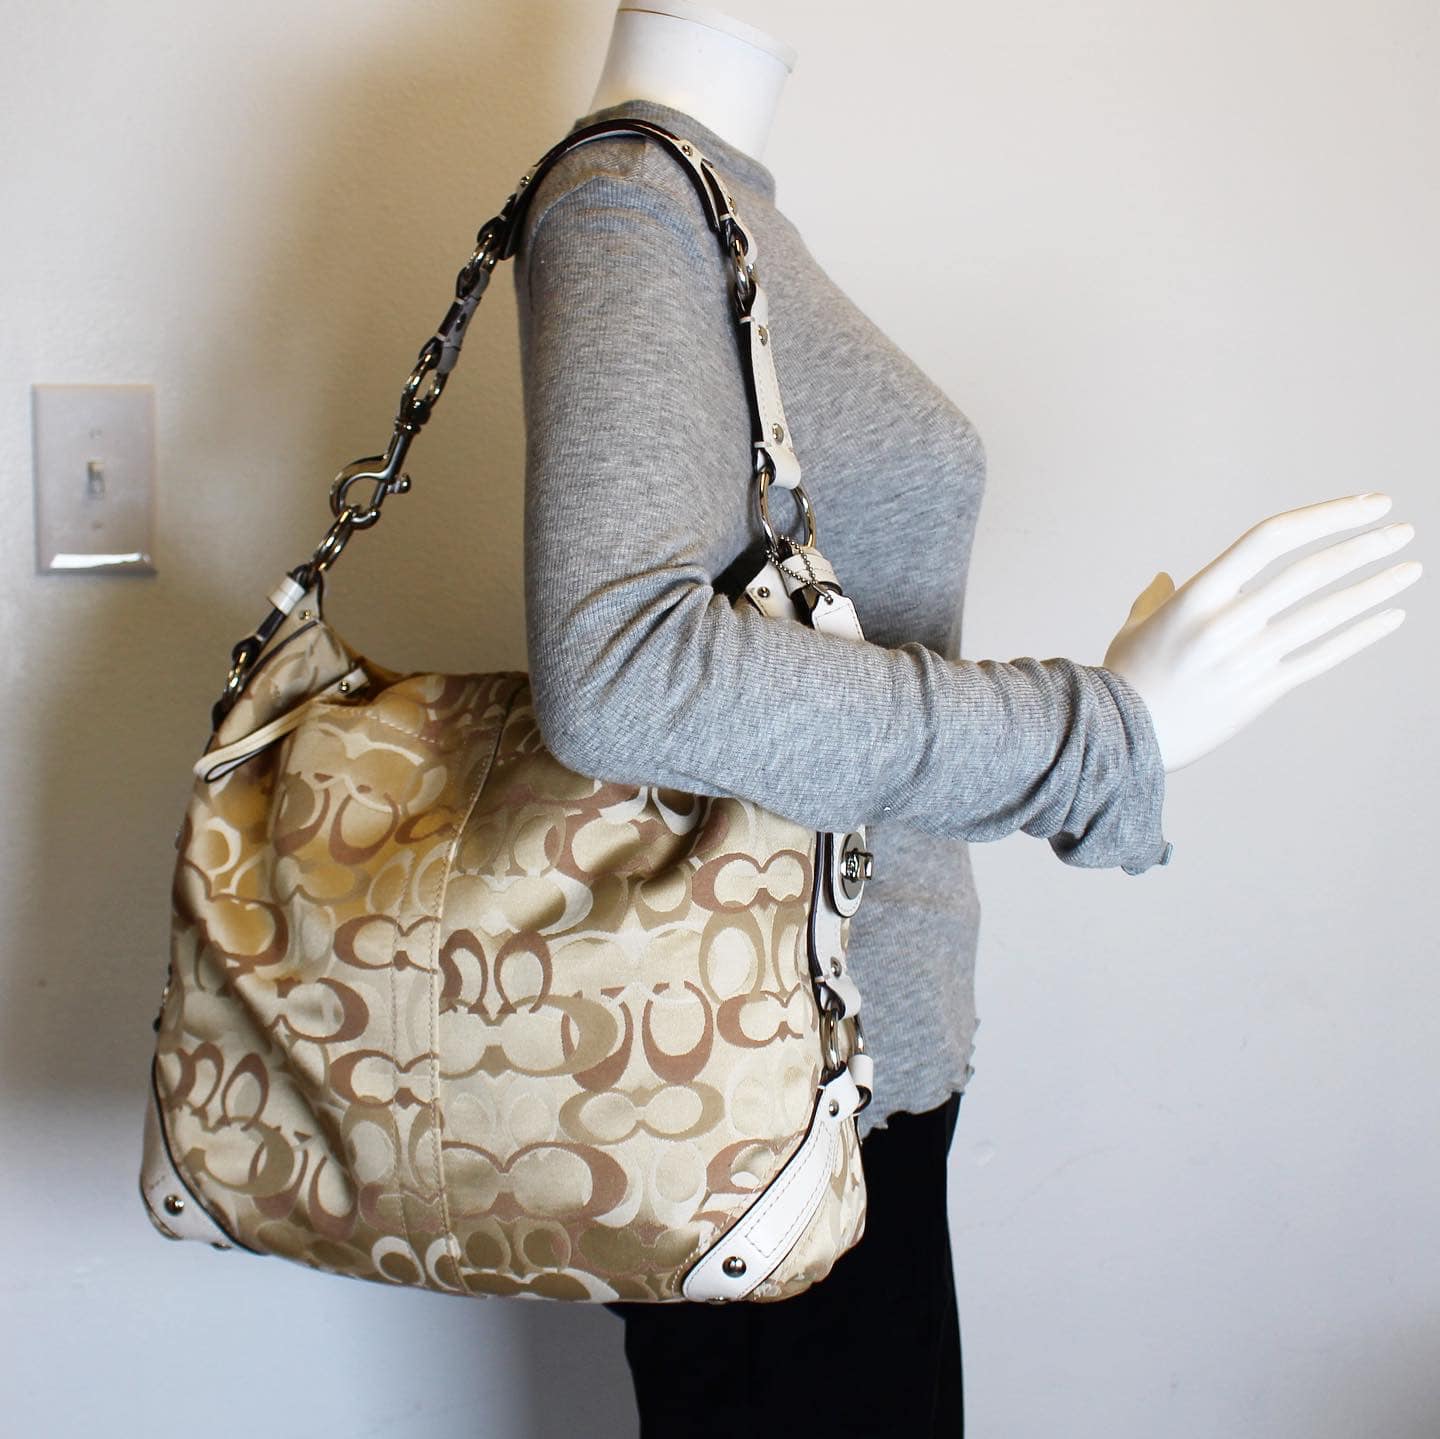 COACH Beige Canvas and Leather Carly Hobo Bag item 41076 h